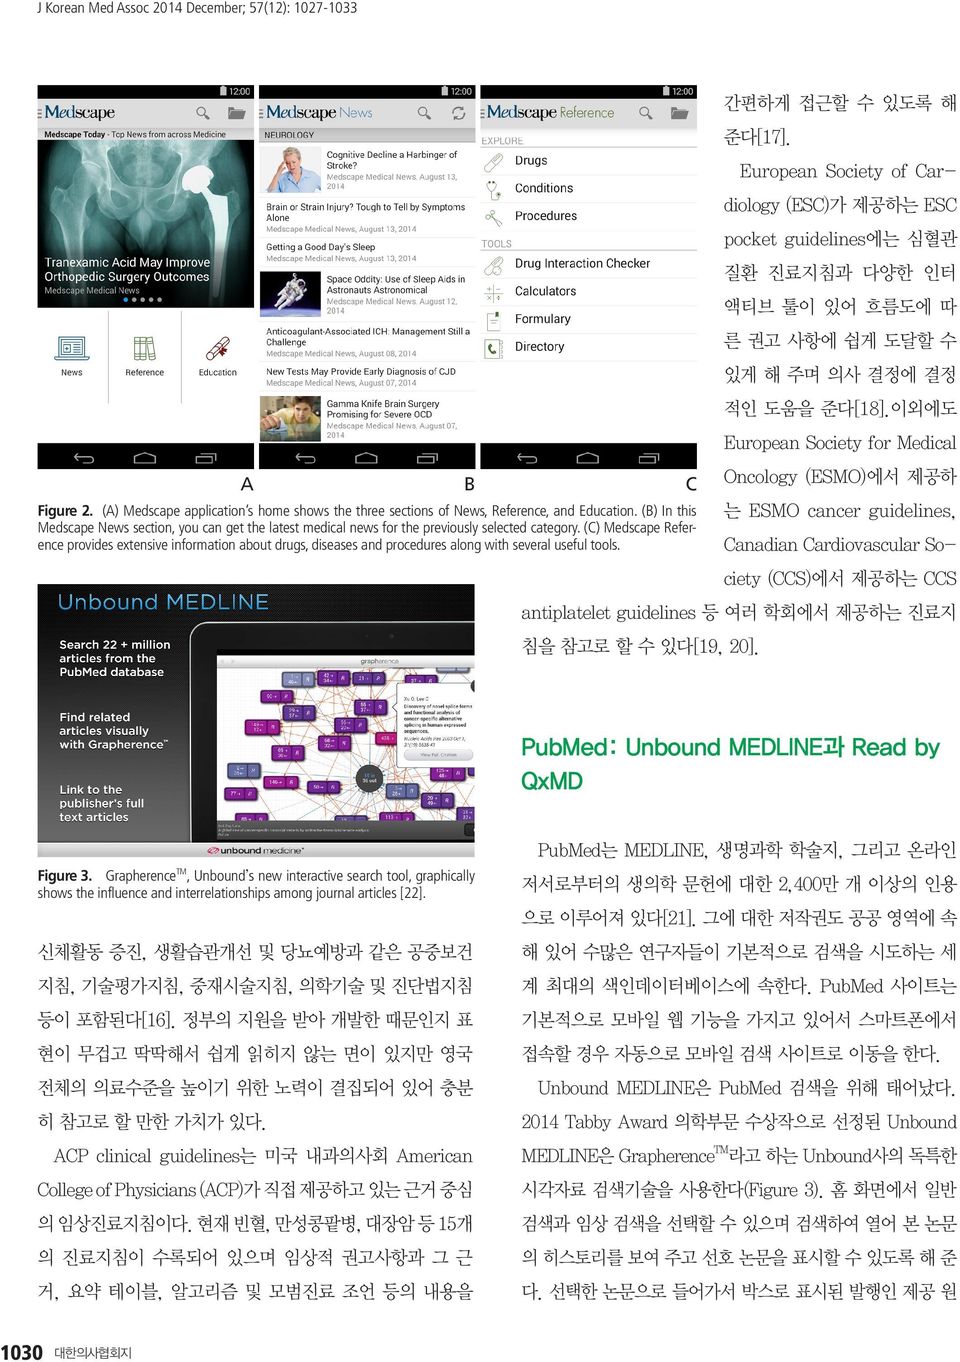 (C) Medscape Reference provides extensive information about drugs, diseases and procedures along with several useful tools. B 간편하게 접근할 수 있도록 해 준다[17].